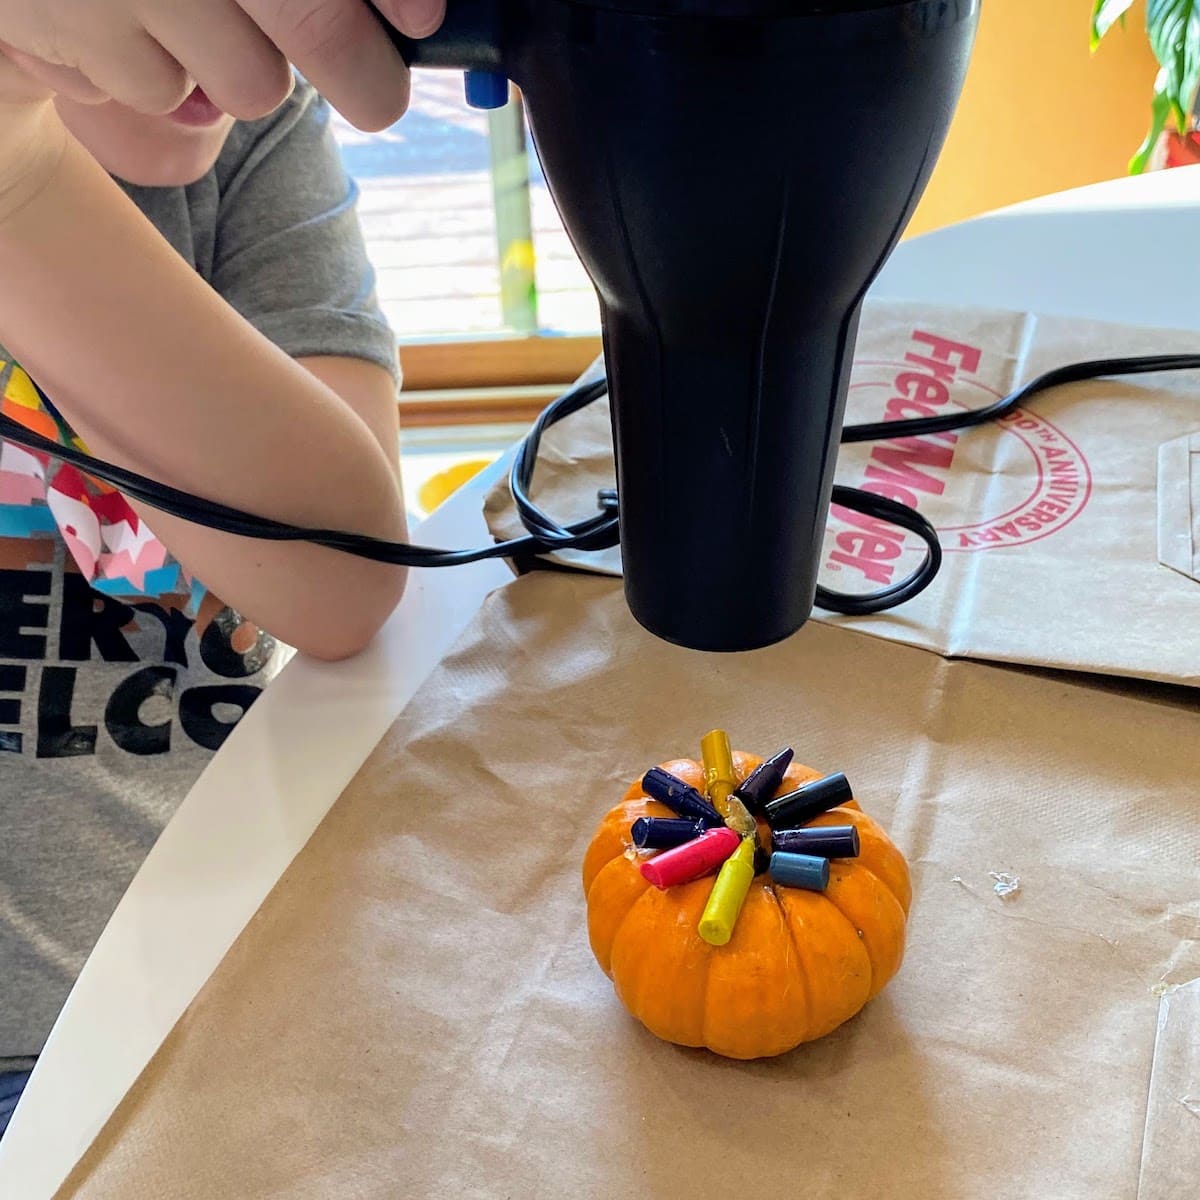 heating crayons on a pumpkin with a blow dryer